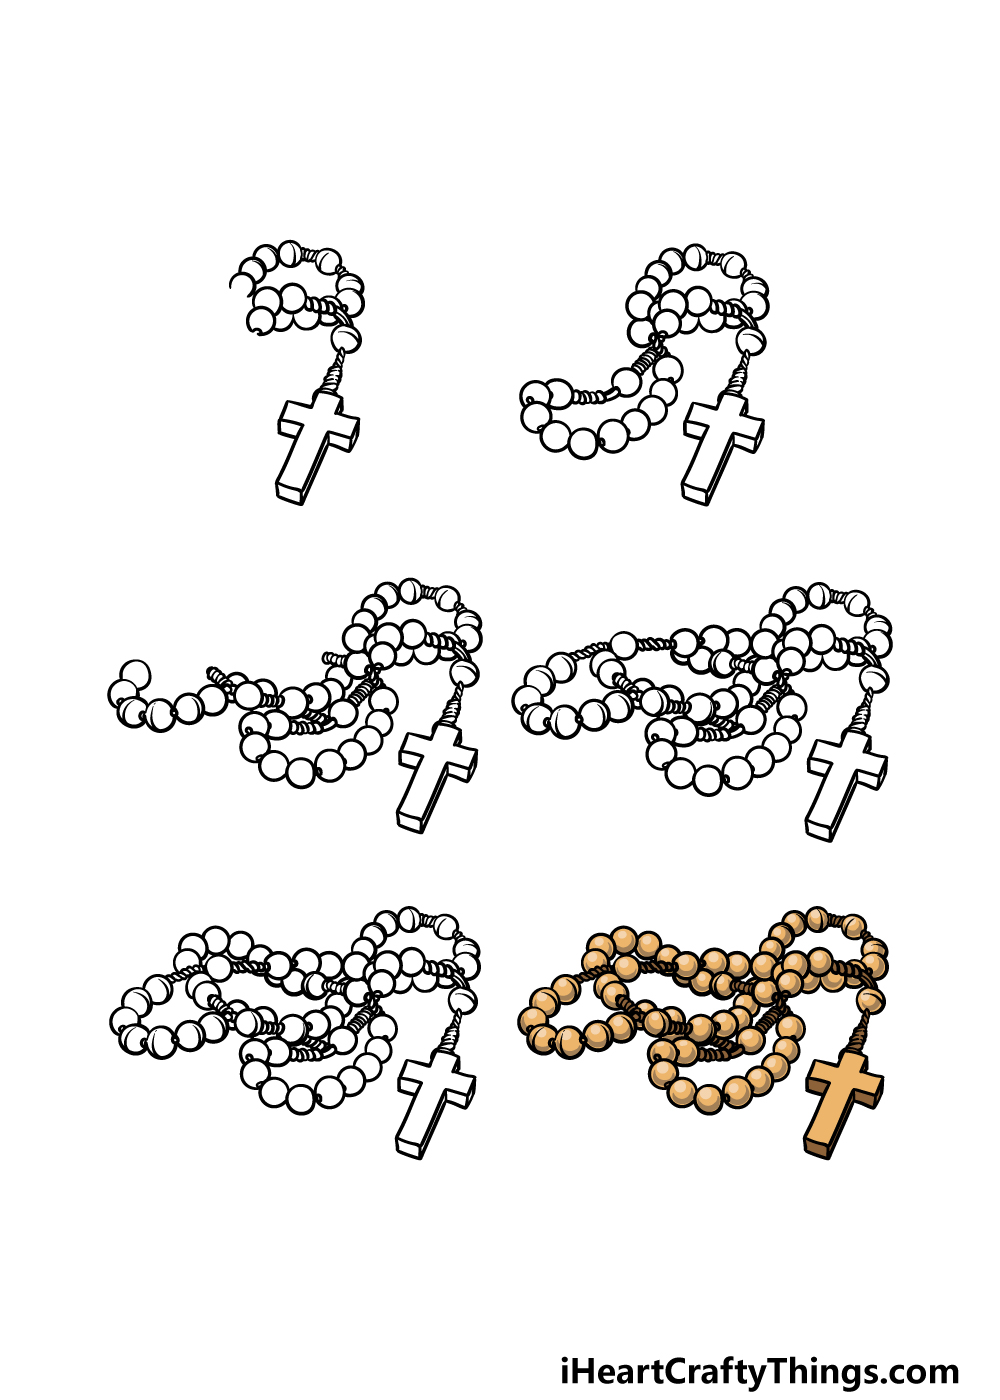 How To Draw A Rosary - A Step by Step Guide